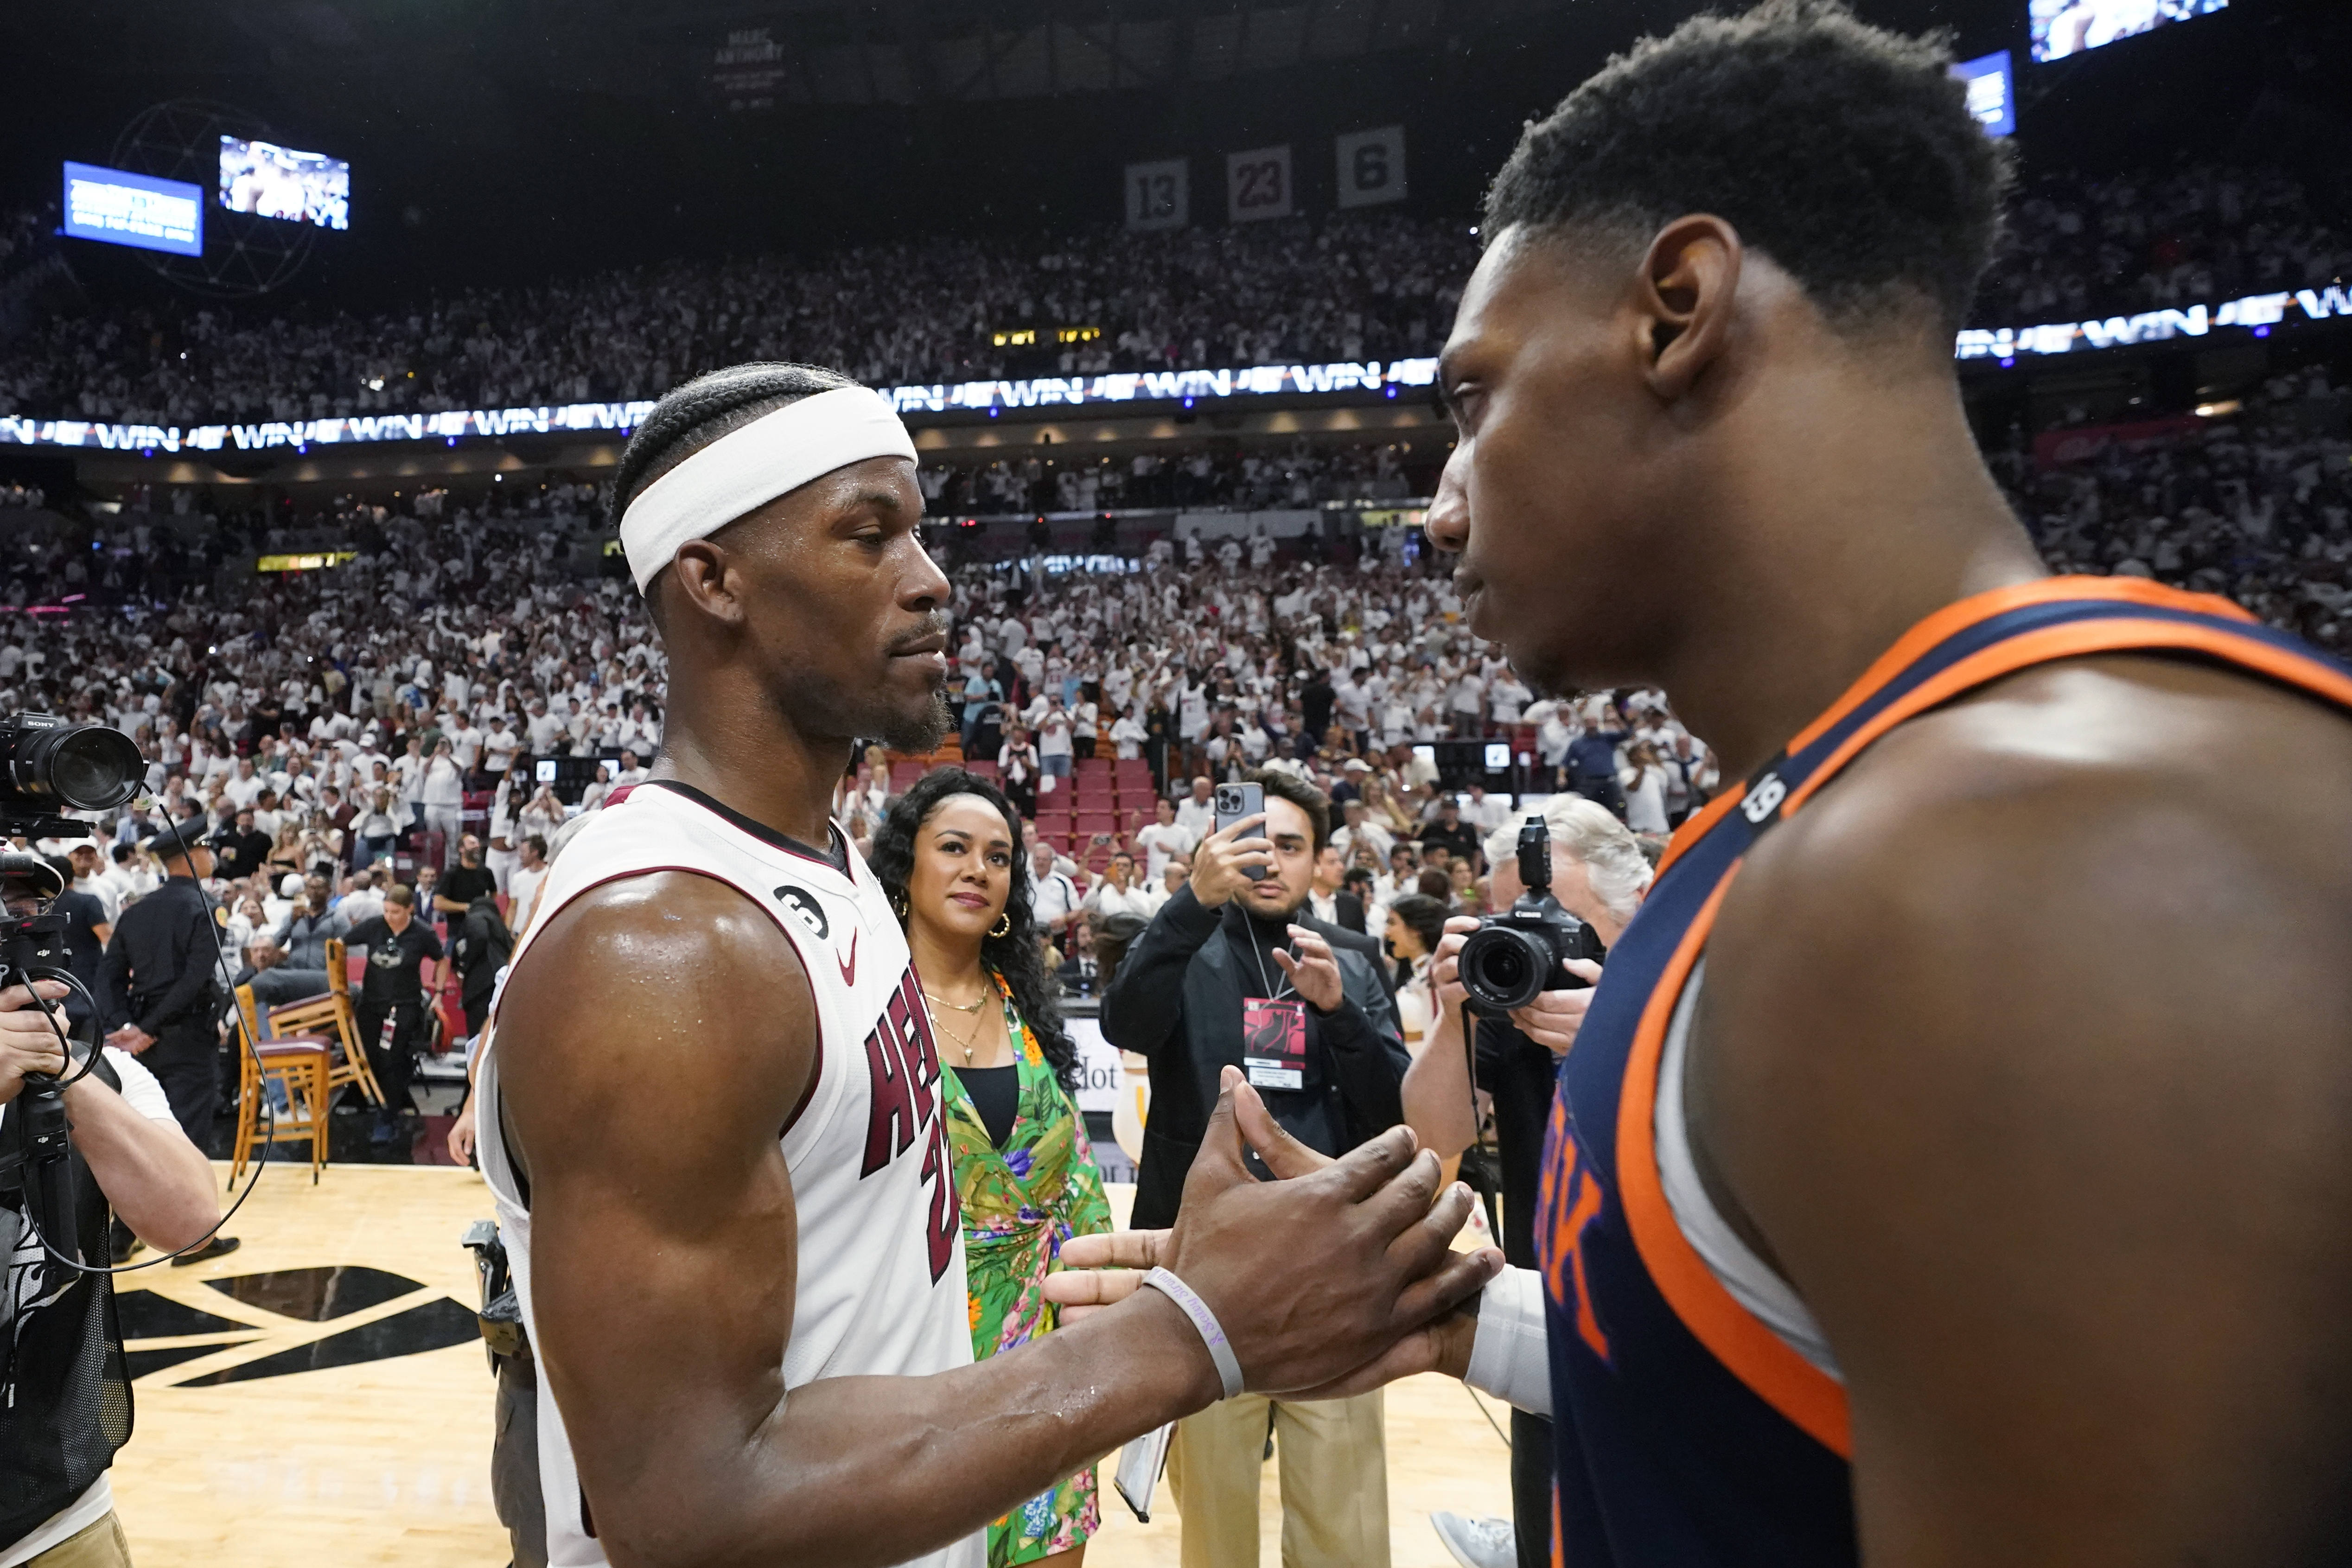 Miami Heat forward Jimmy Butler, left, and New York Knicks guard RJ Barrett congratulate each other after the Heat beat the Knicks 96-92 during Game 6 of an NBA basketball second-round playoff series, Friday, May 12, 2023, in Miami. (AP Photo/Wilfredo Lee)